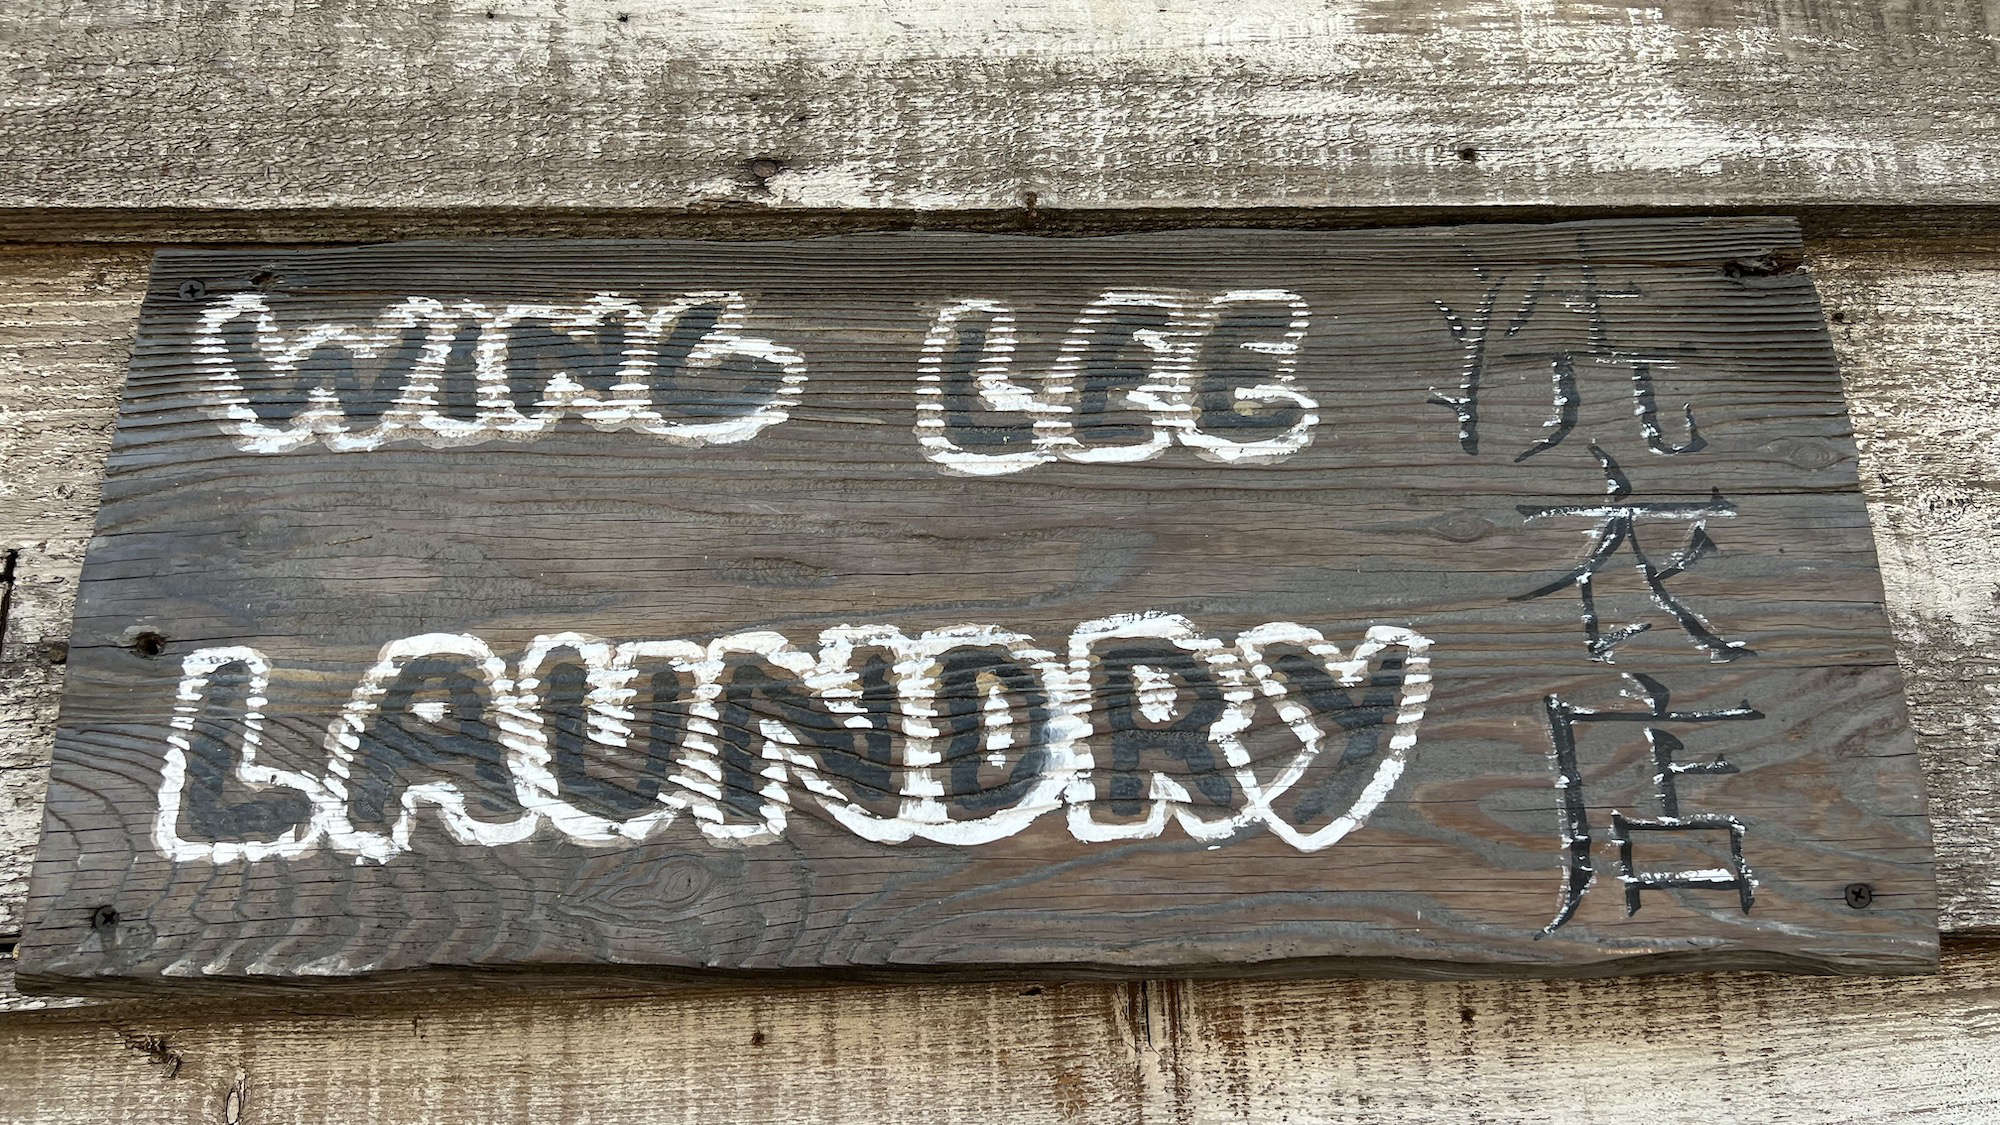 Wing Lee Laundry